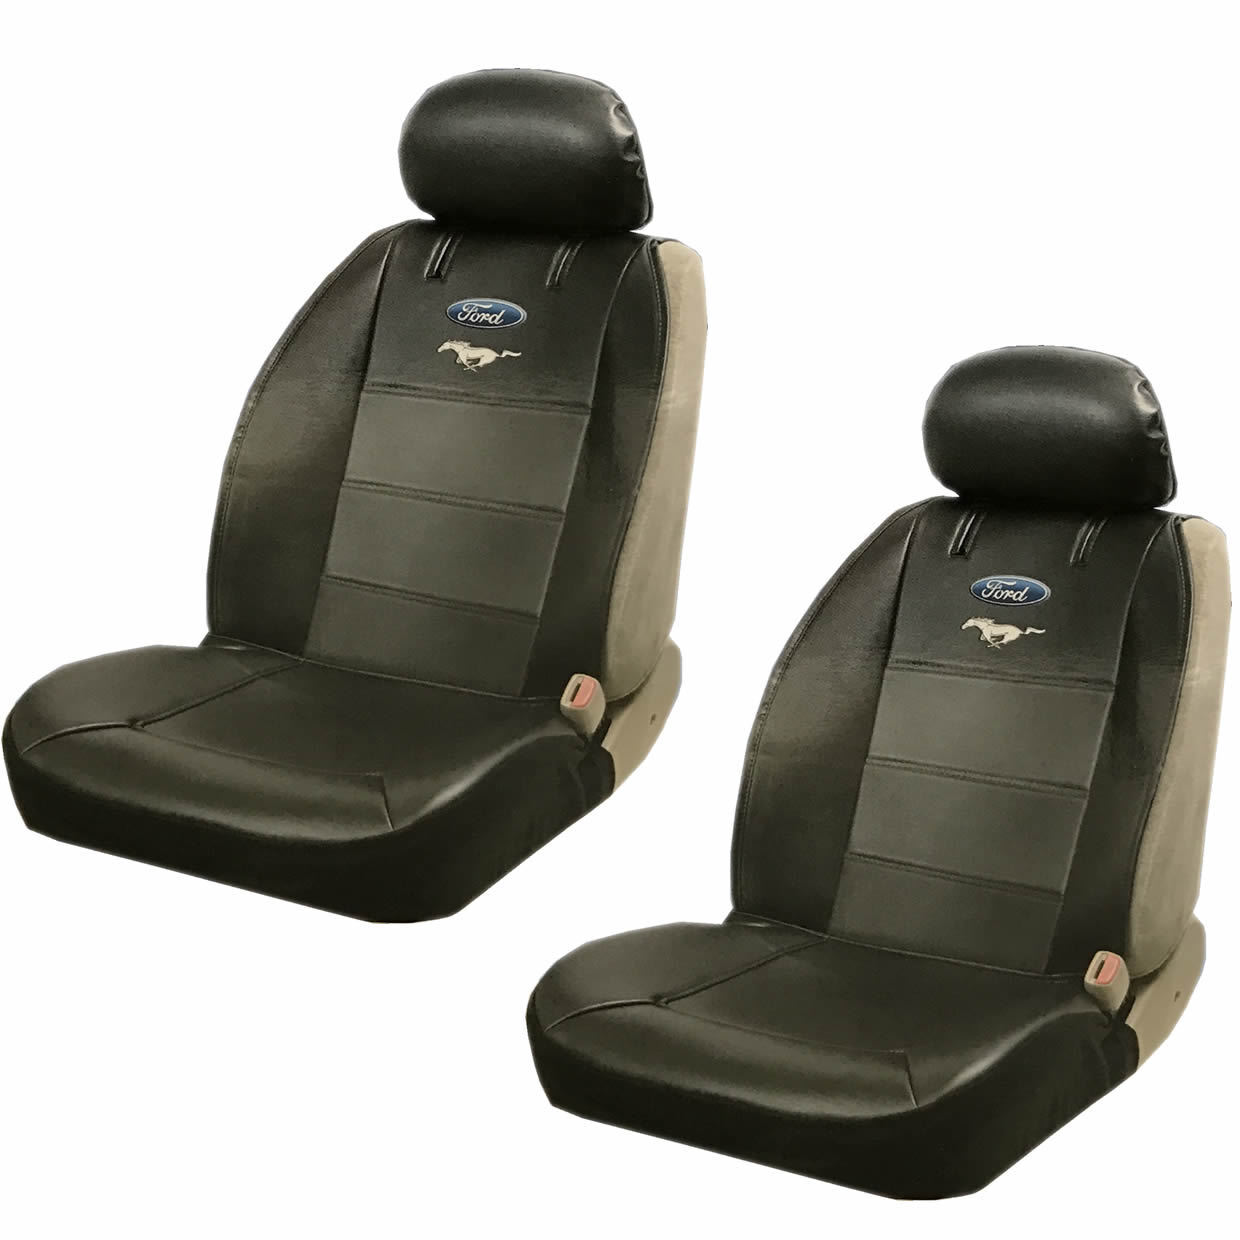 Ford Mustang Logo Seat Covers - Velcromag